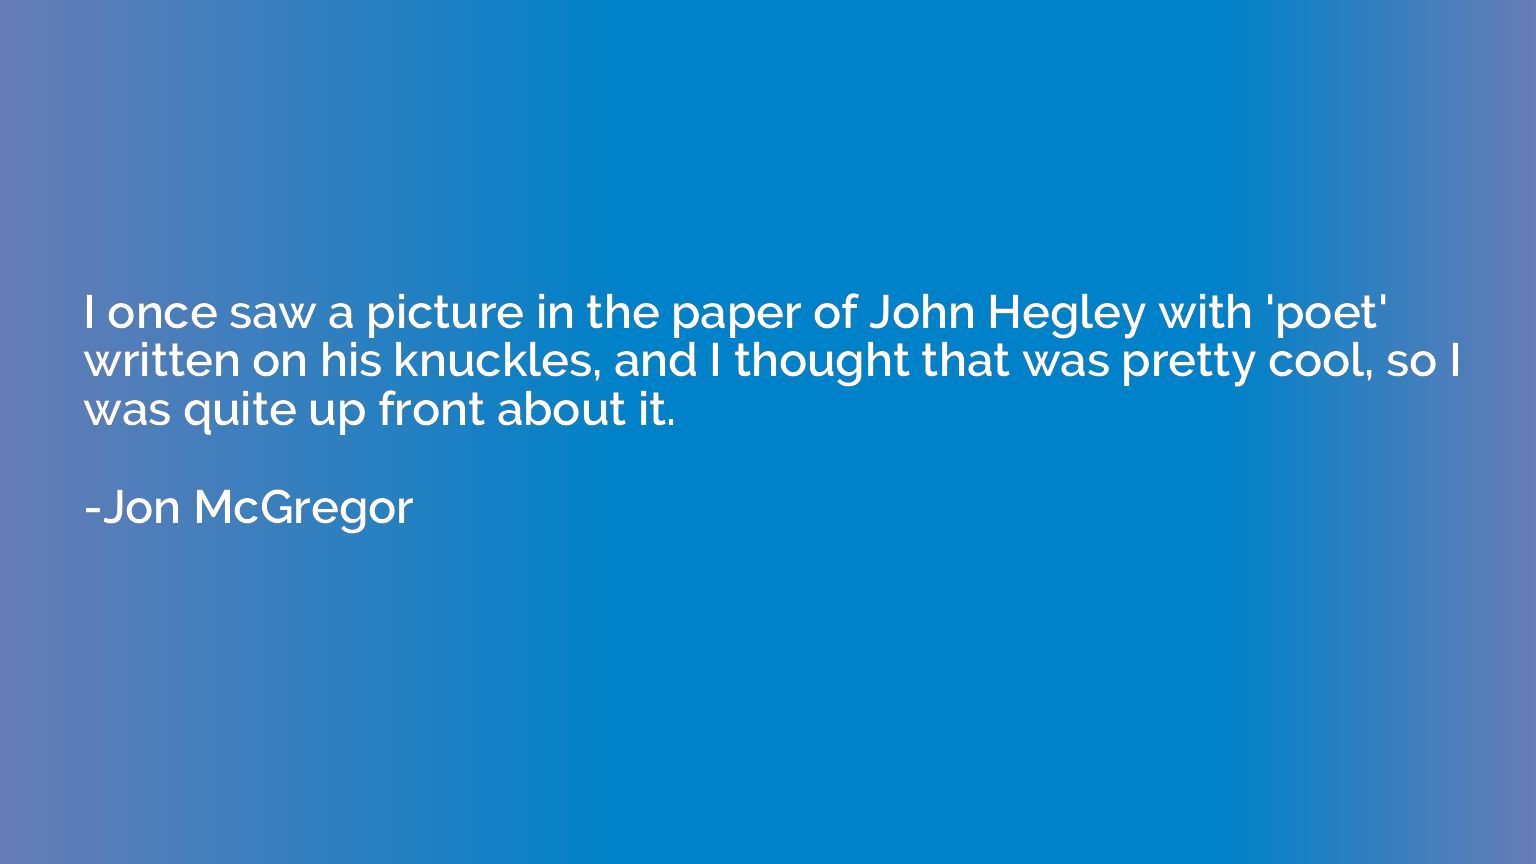 I once saw a picture in the paper of John Hegley with 'poet'